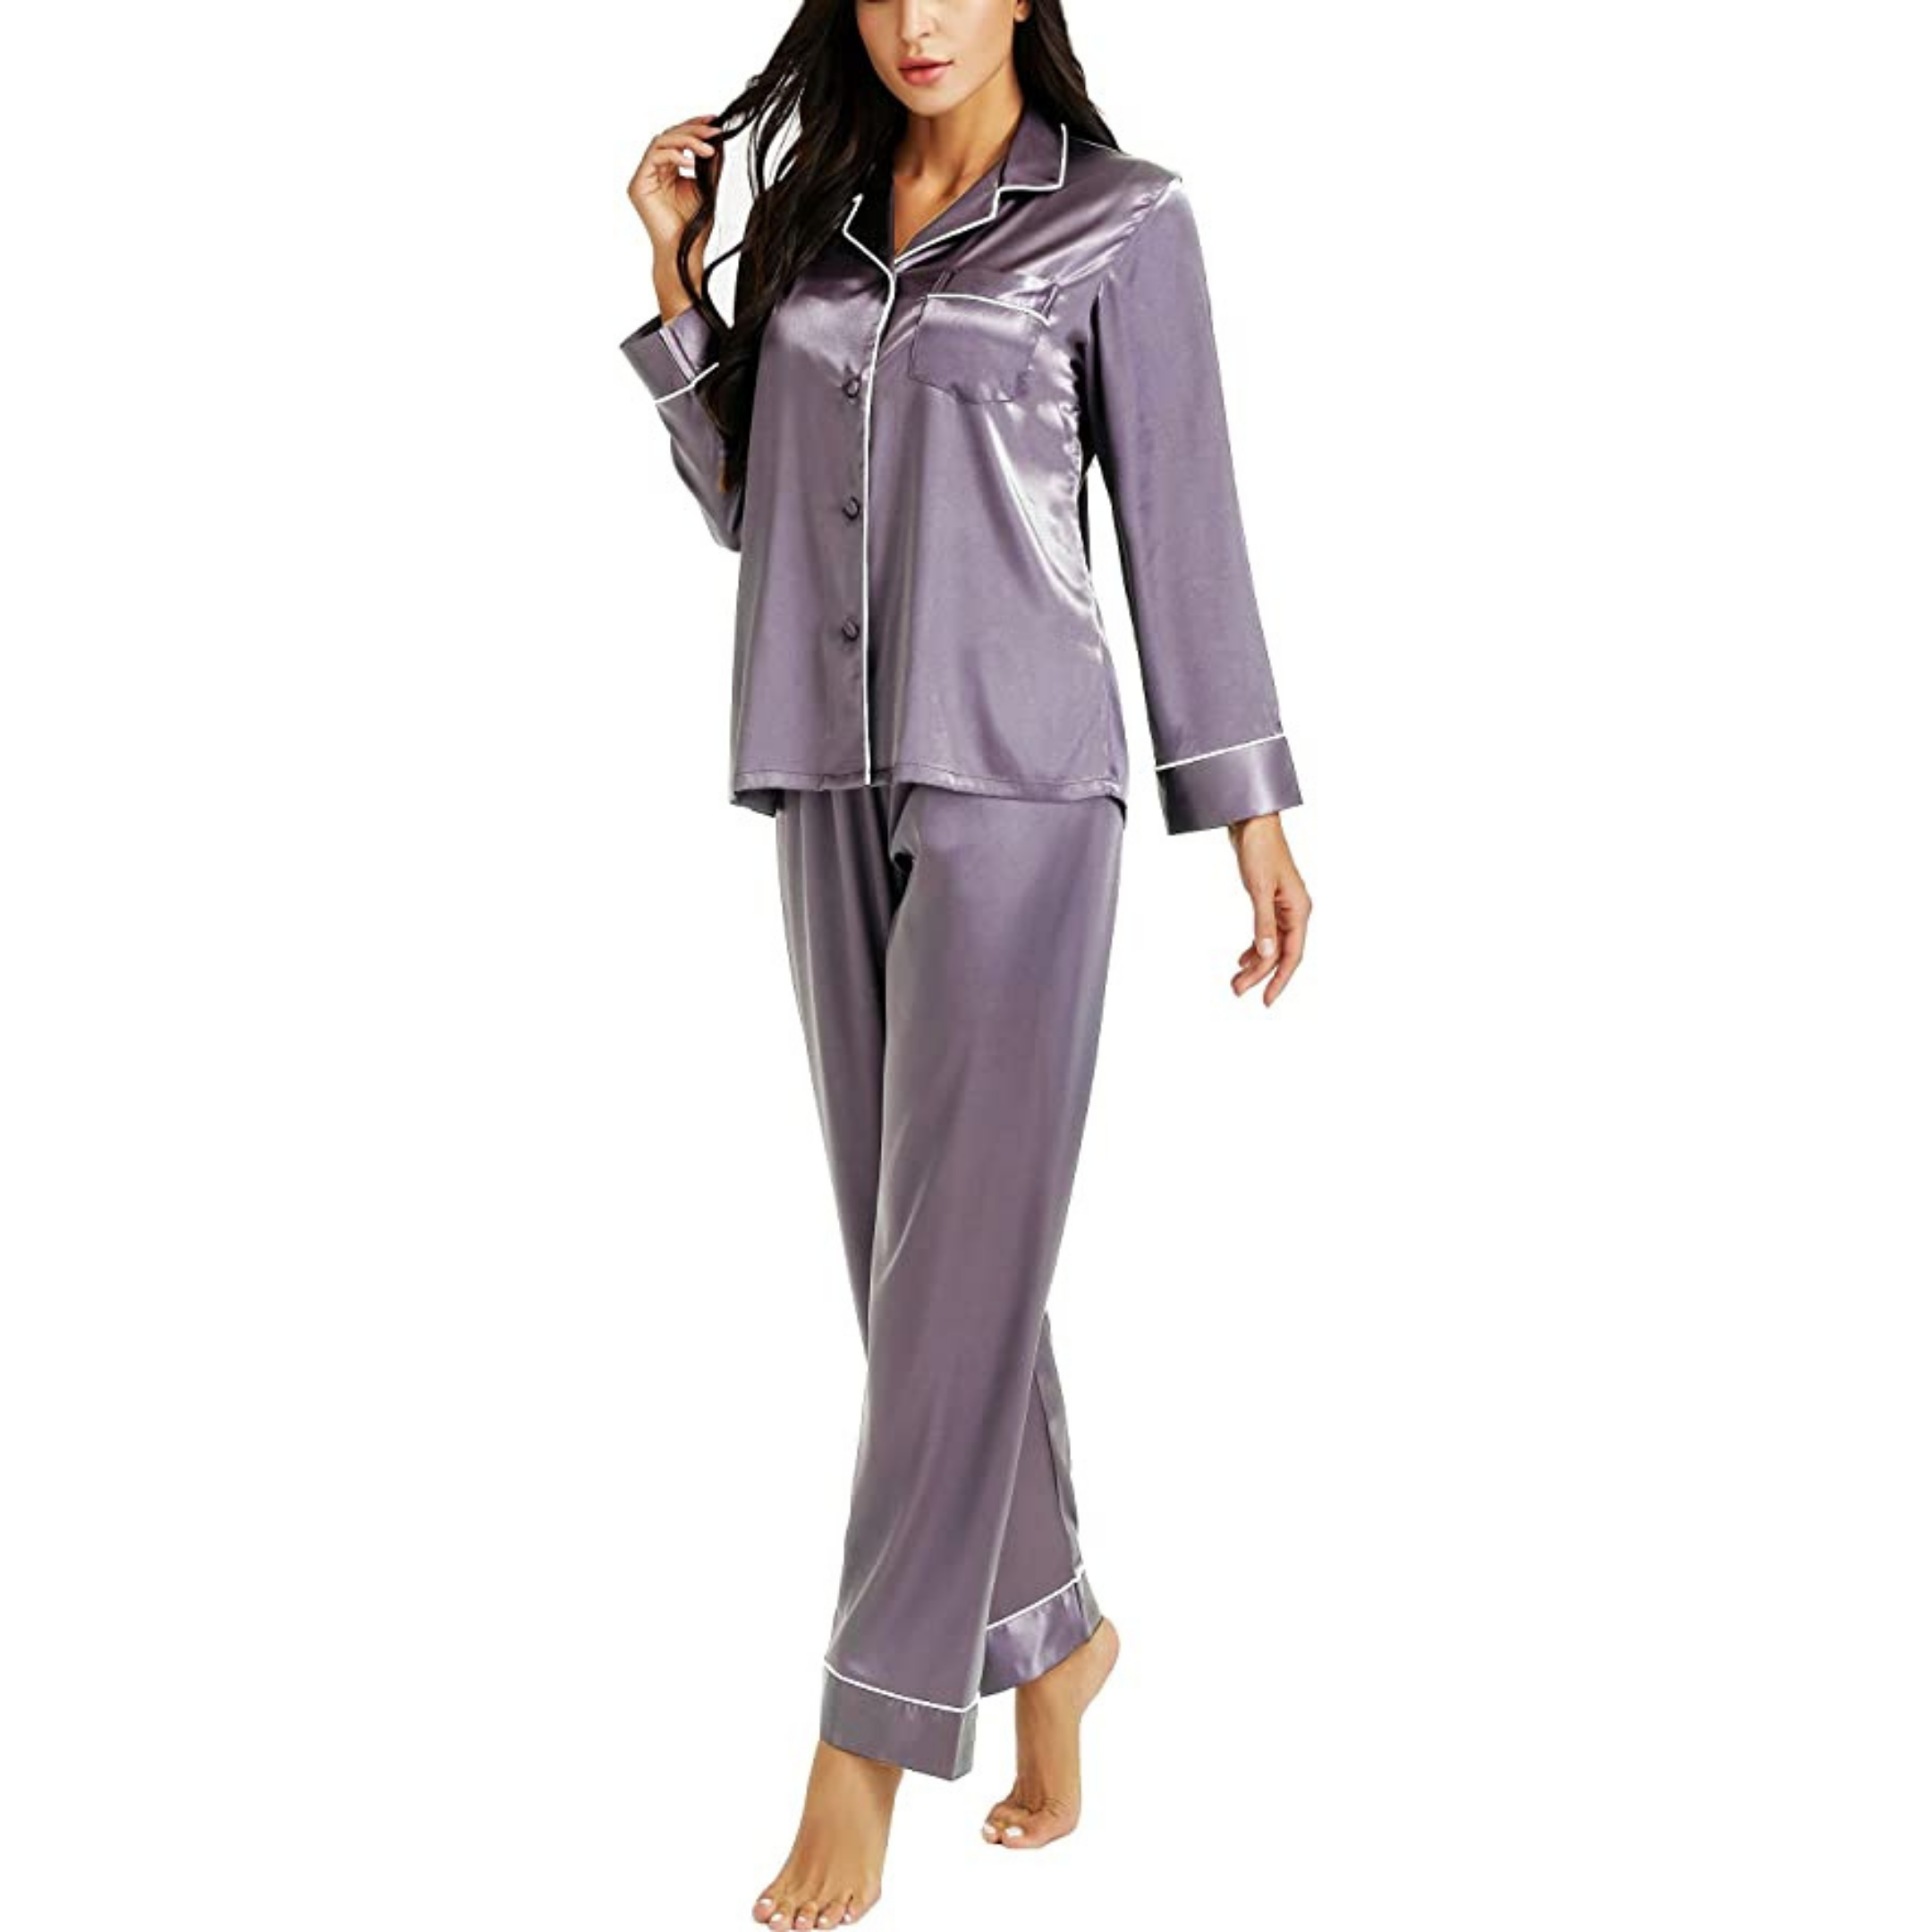 FACT: Amazon Has Some Of The Best Pajama Sets